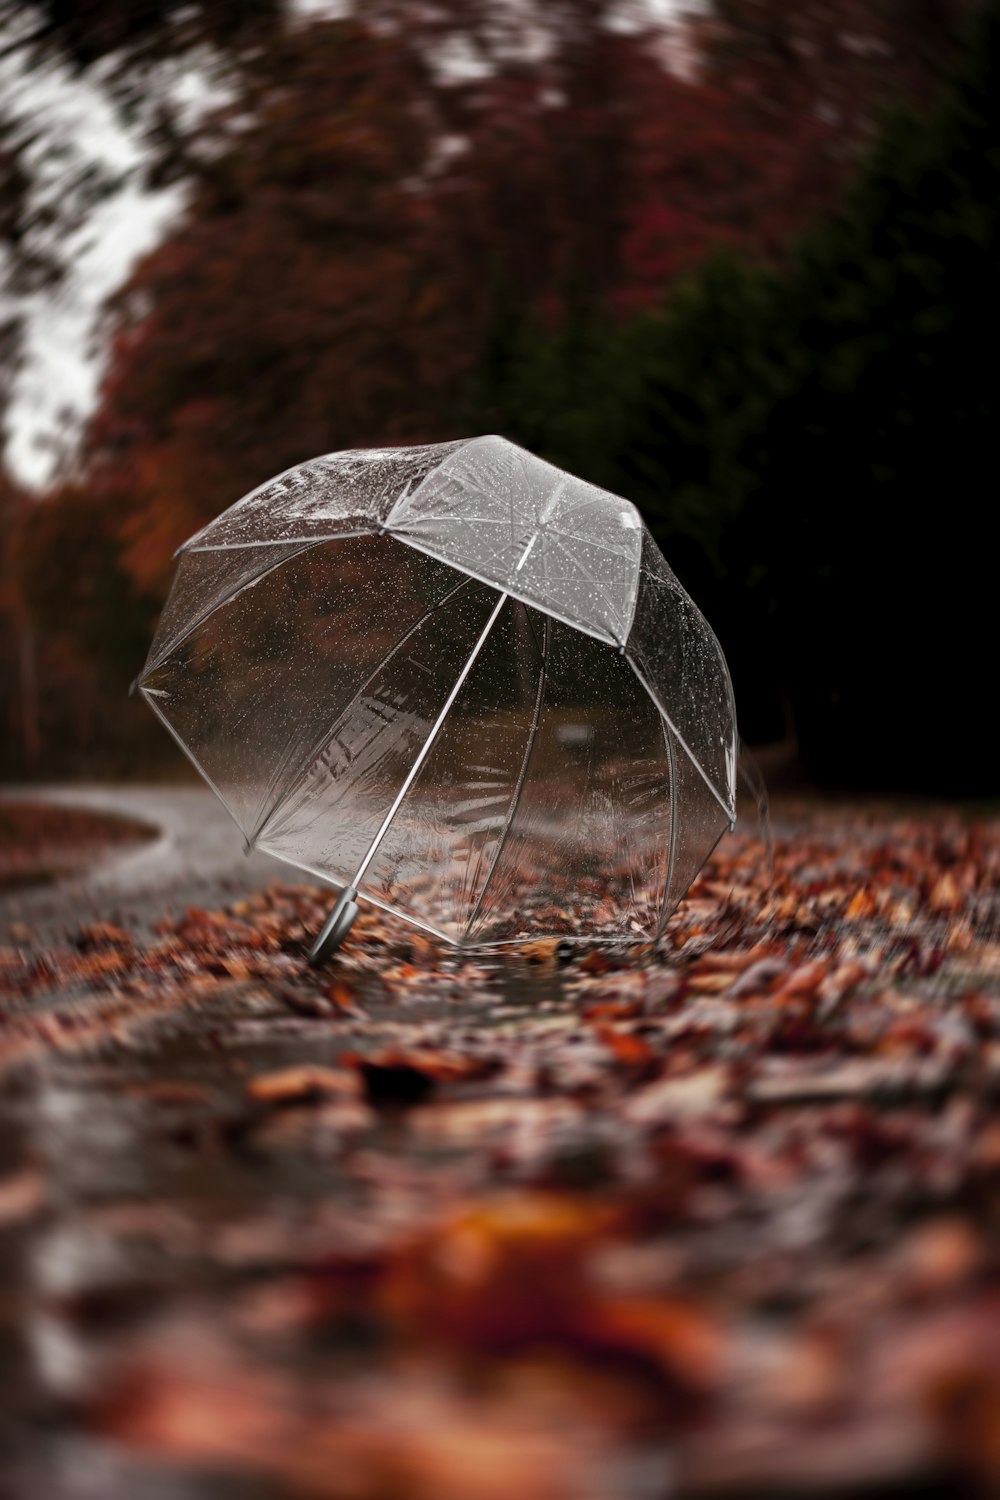 clear plastic umbrella on road filled with leaves